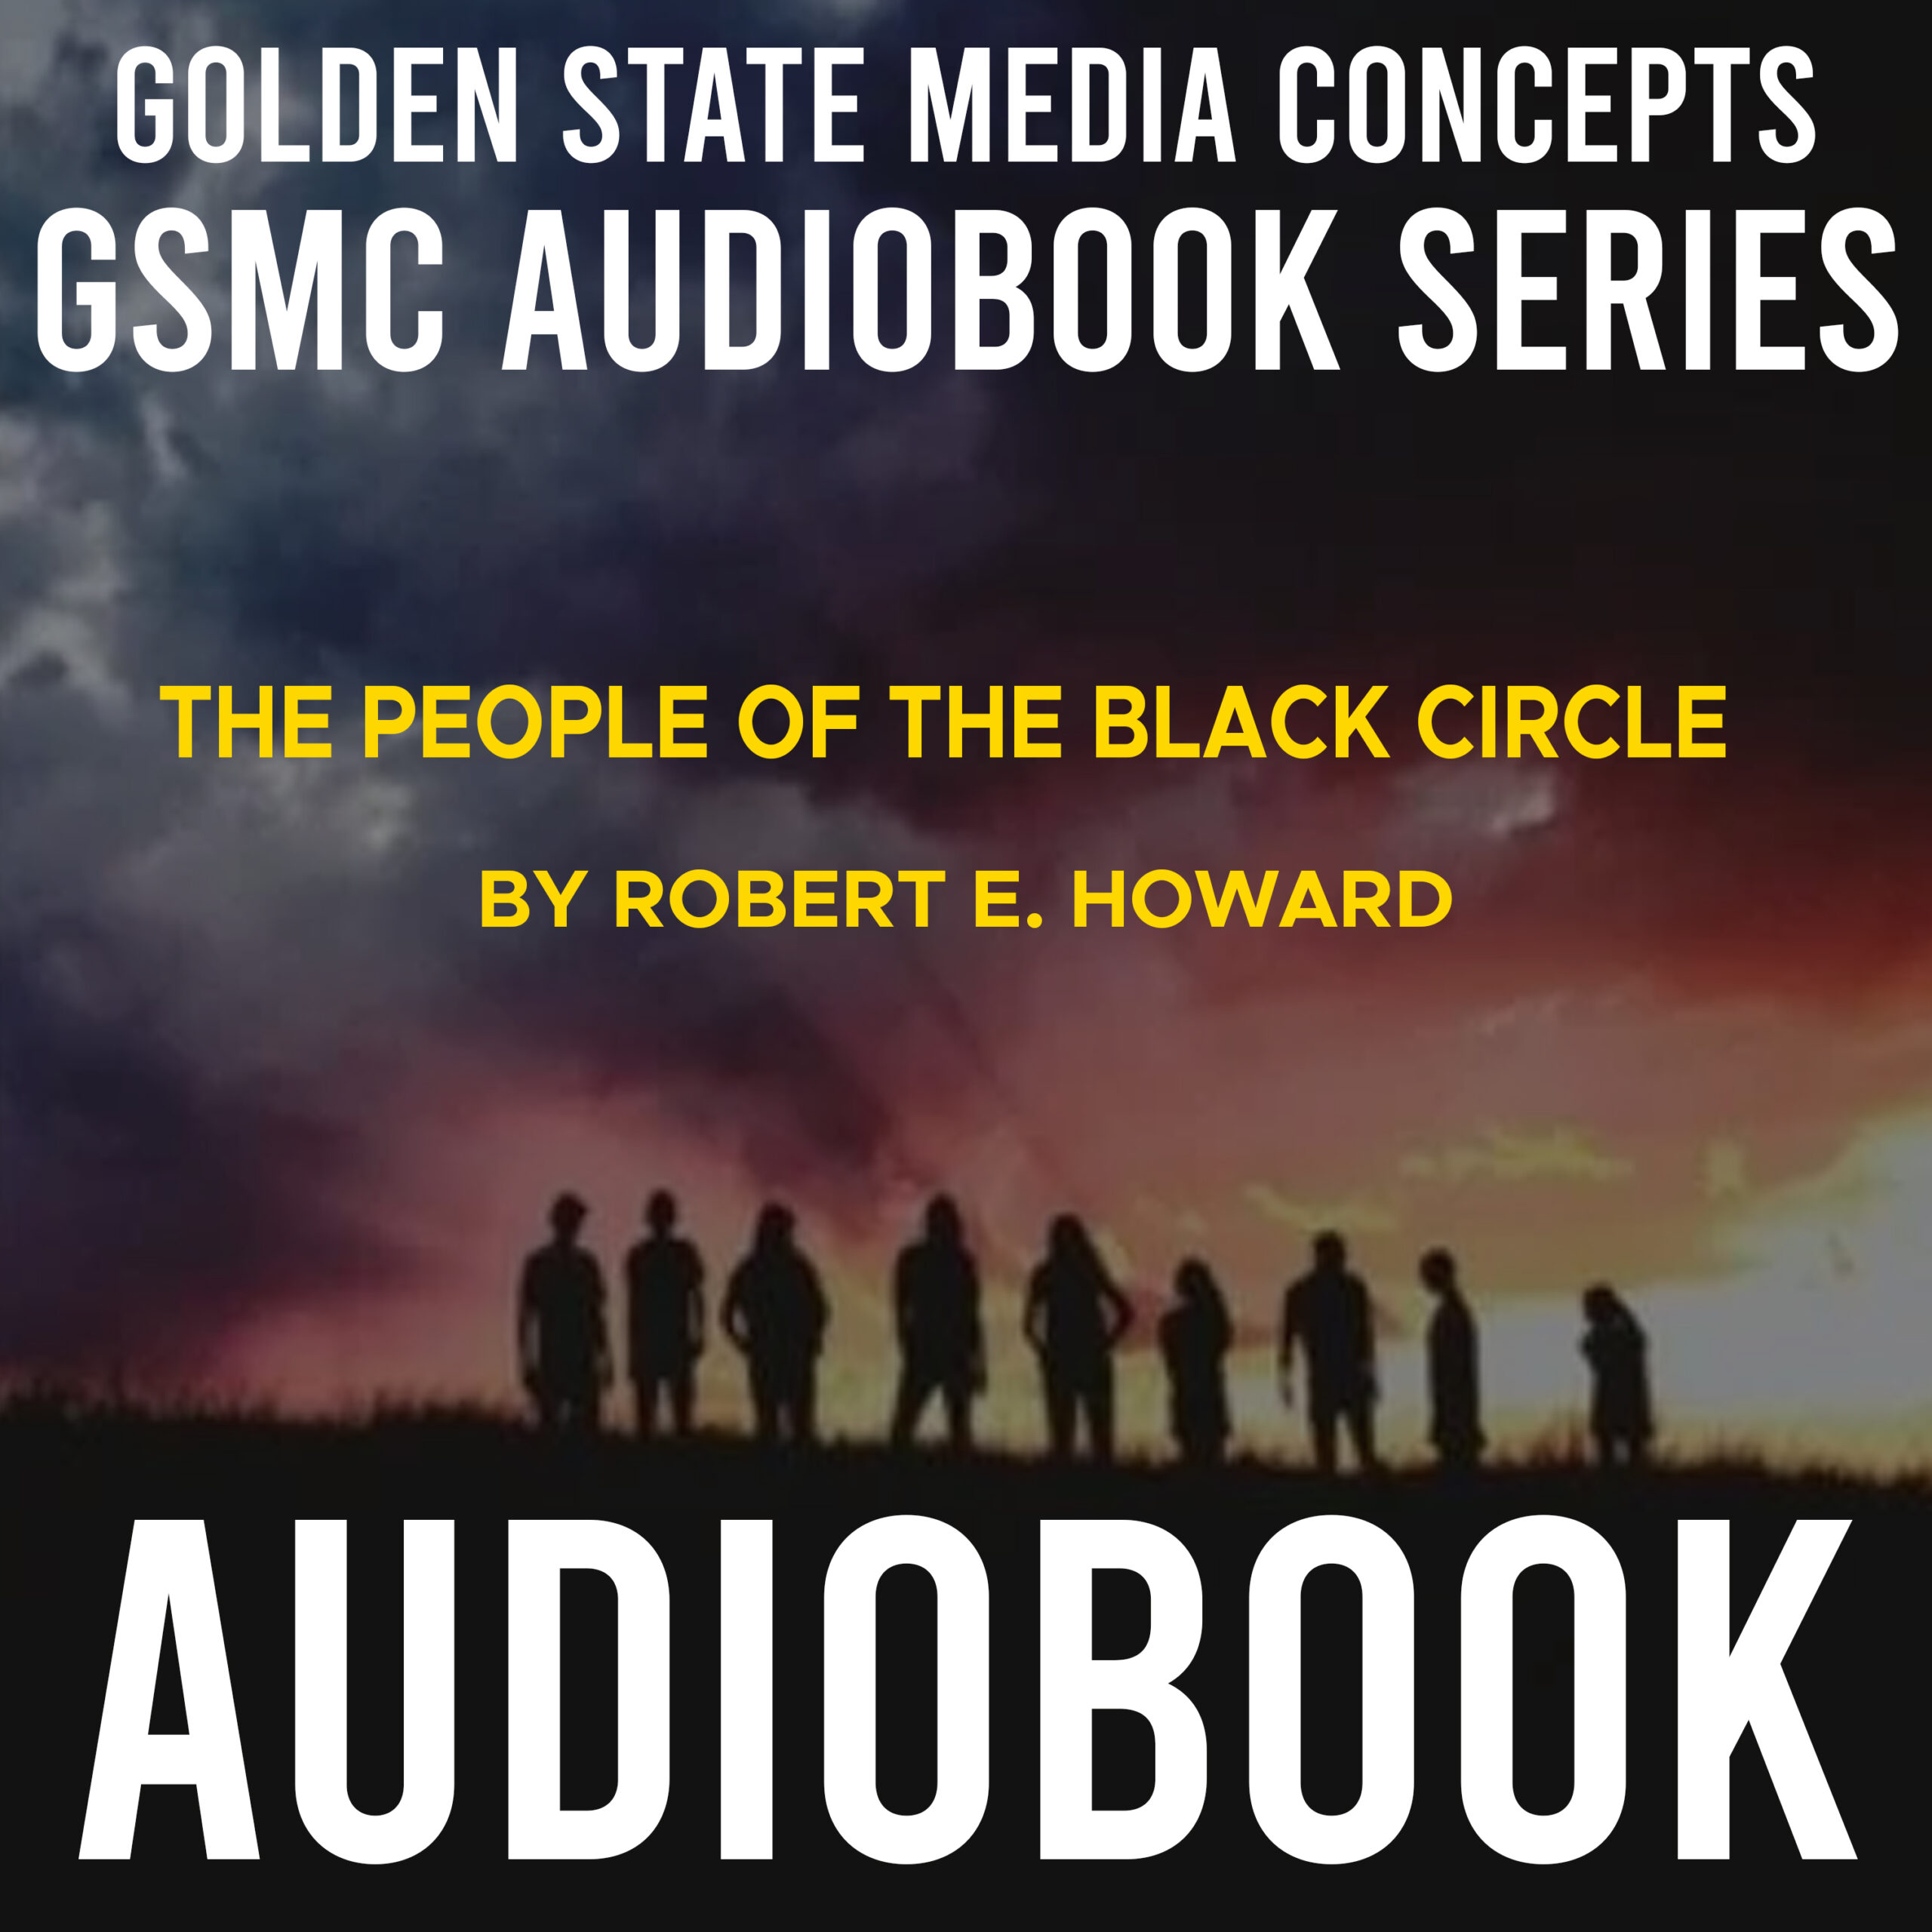 GSMC Audiobook Series: The People of the Black Circle